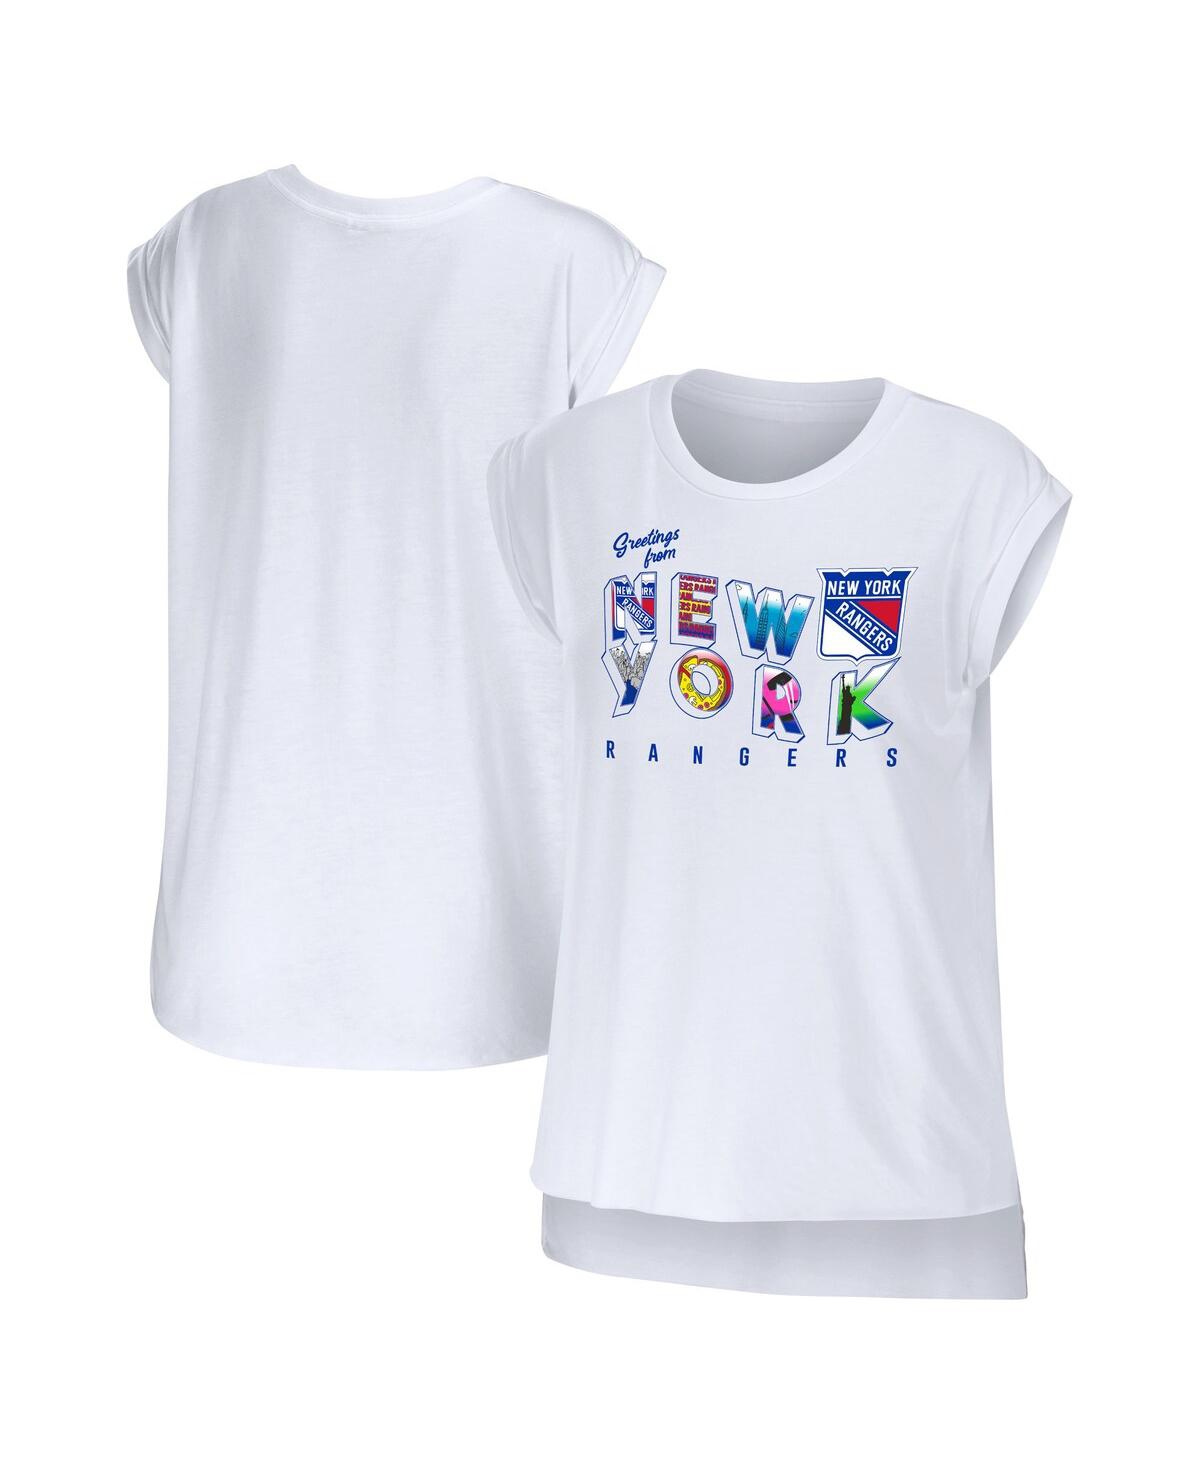 Shop Wear By Erin Andrews Women's  White New York Rangers Greetings From Muscle T-shirt